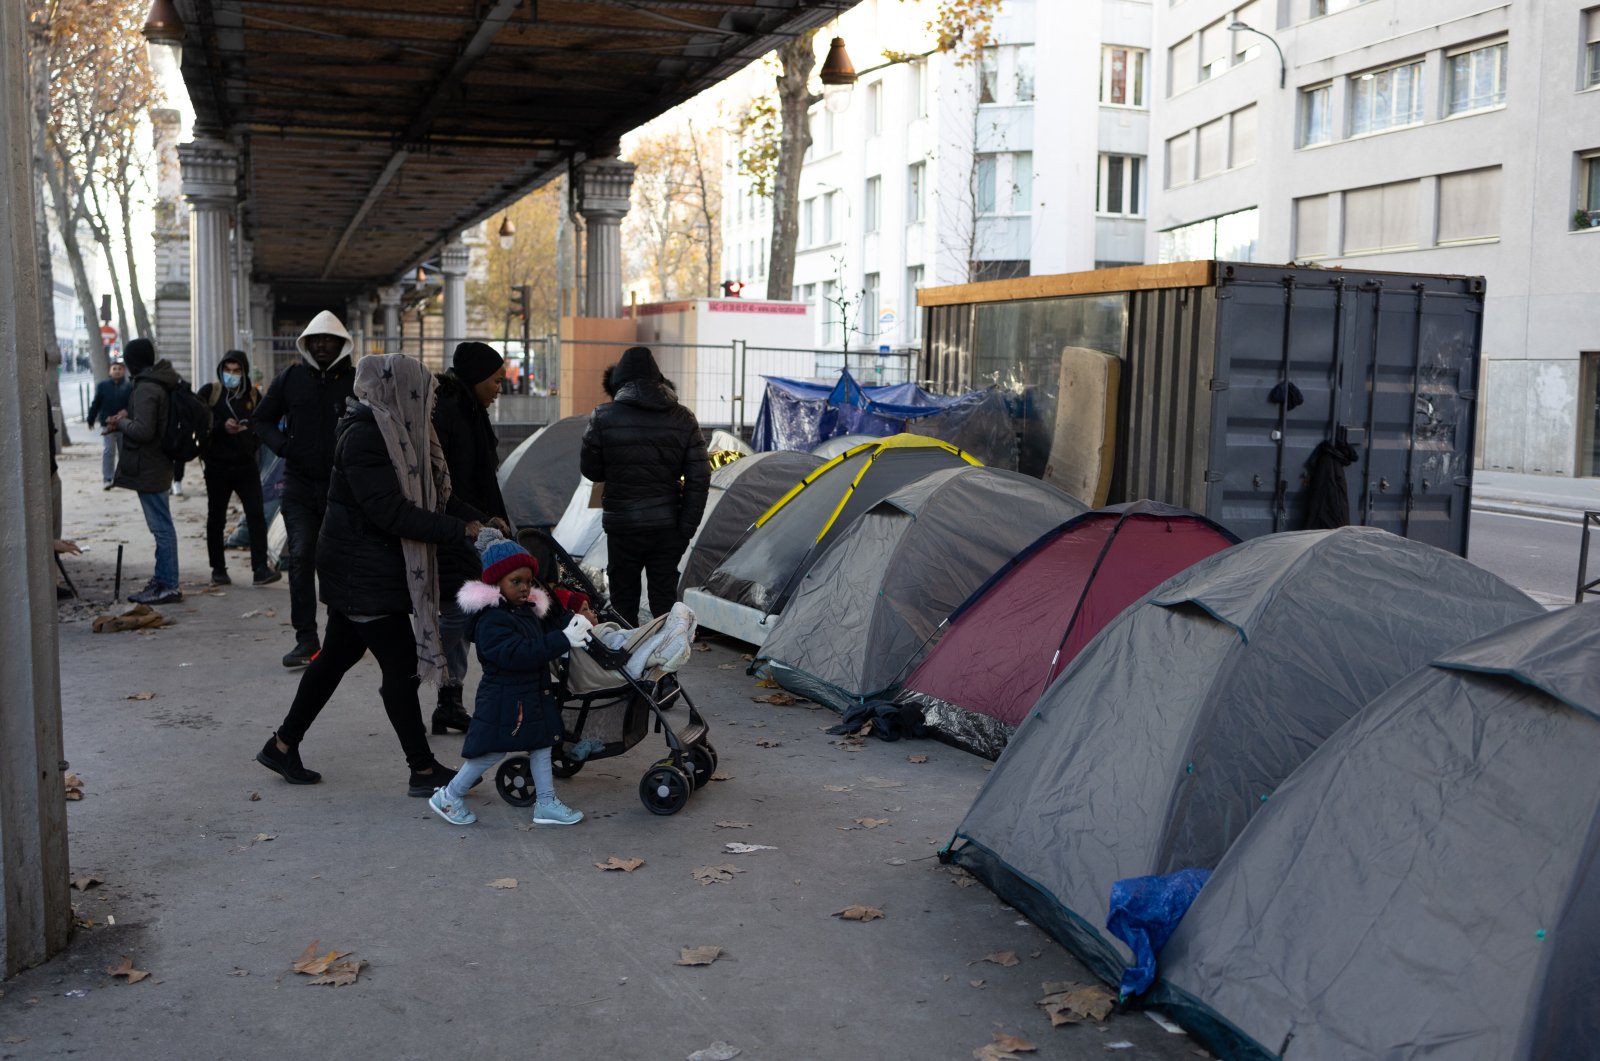 People walk near migrant tents as the Mayor of Paris with members of associations in solidarity with migrants visits a refugee camp (migrant camp) under the aerial metro on the Boulevard de la Chapelle in Paris on Dec. 9, 2022. (Reuters File Photo)